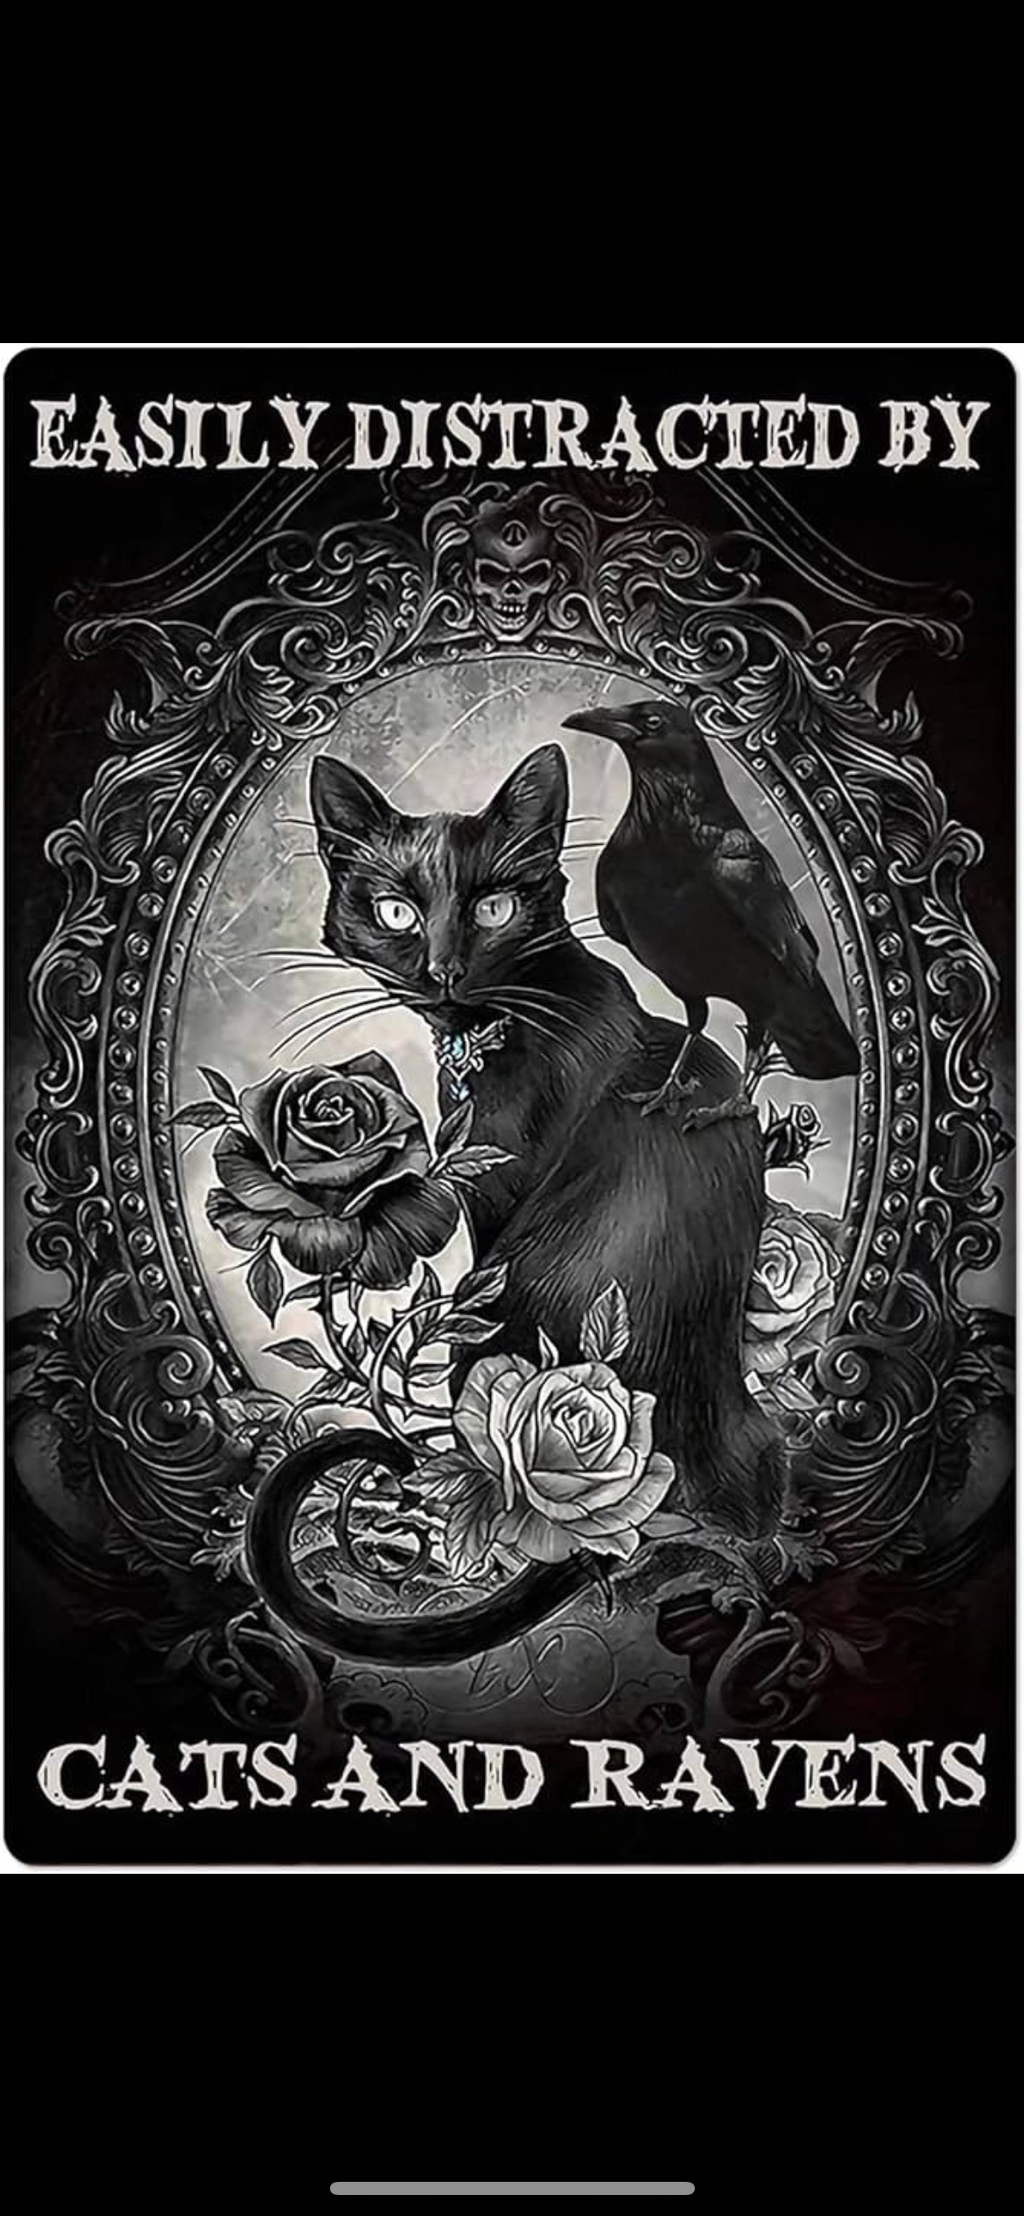 Metal Wall Plaque Easily Distracted By Cats And Ravens - Lighten Up Shop